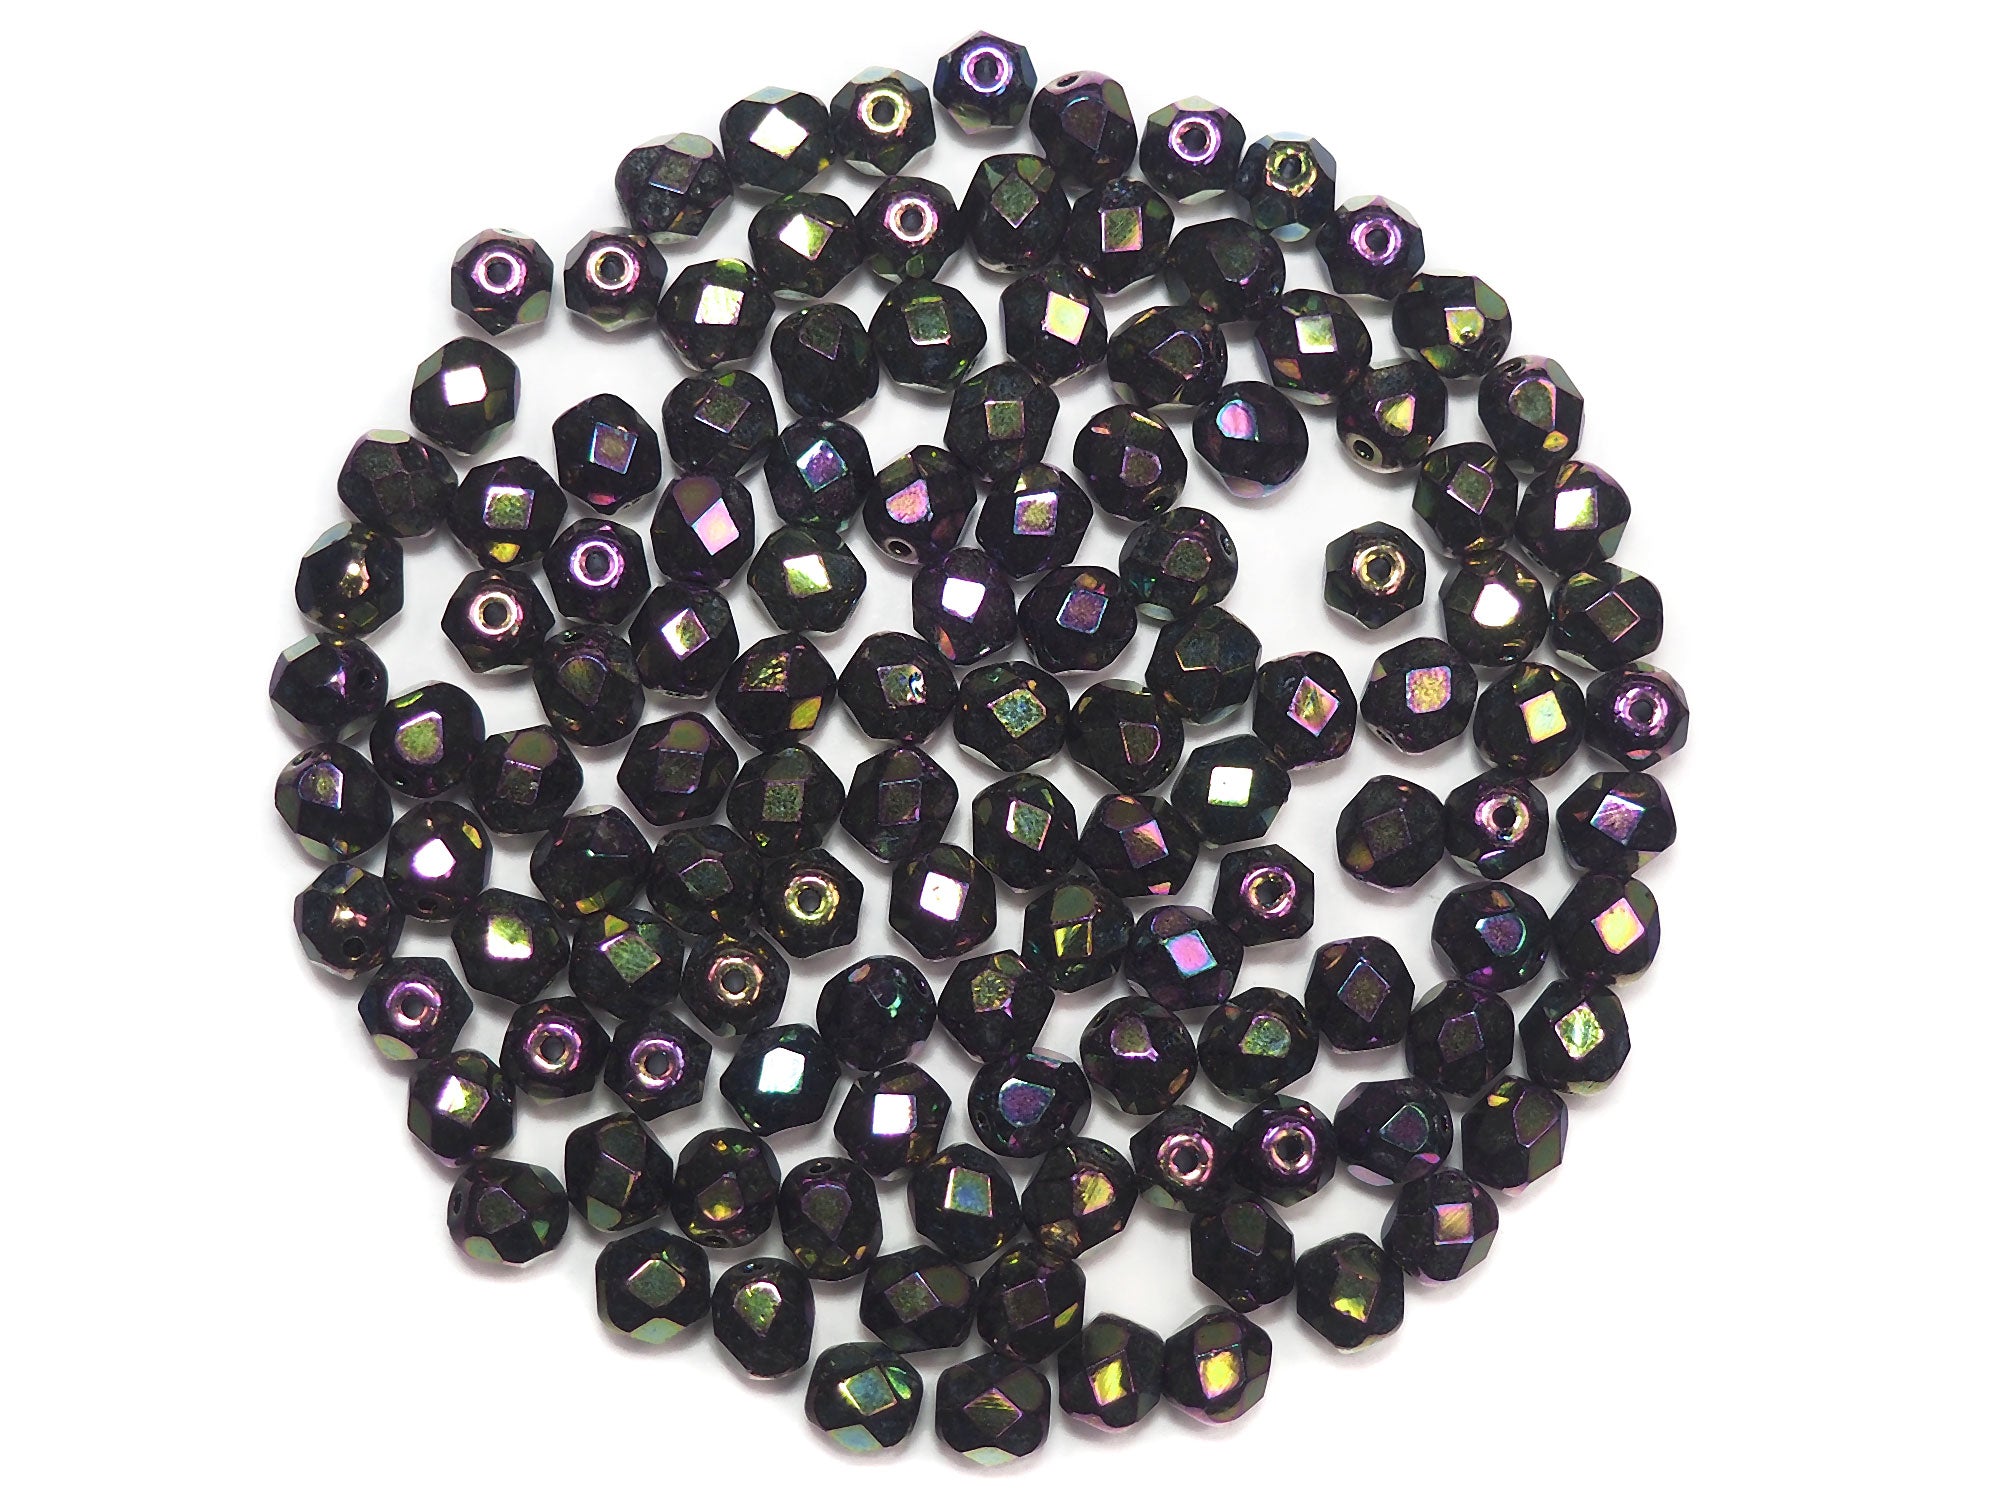 Crystal Violet Luster Fully coated, Czech Fire Polished Round Faceted Glass Beads, 6mm 60pcs, P492